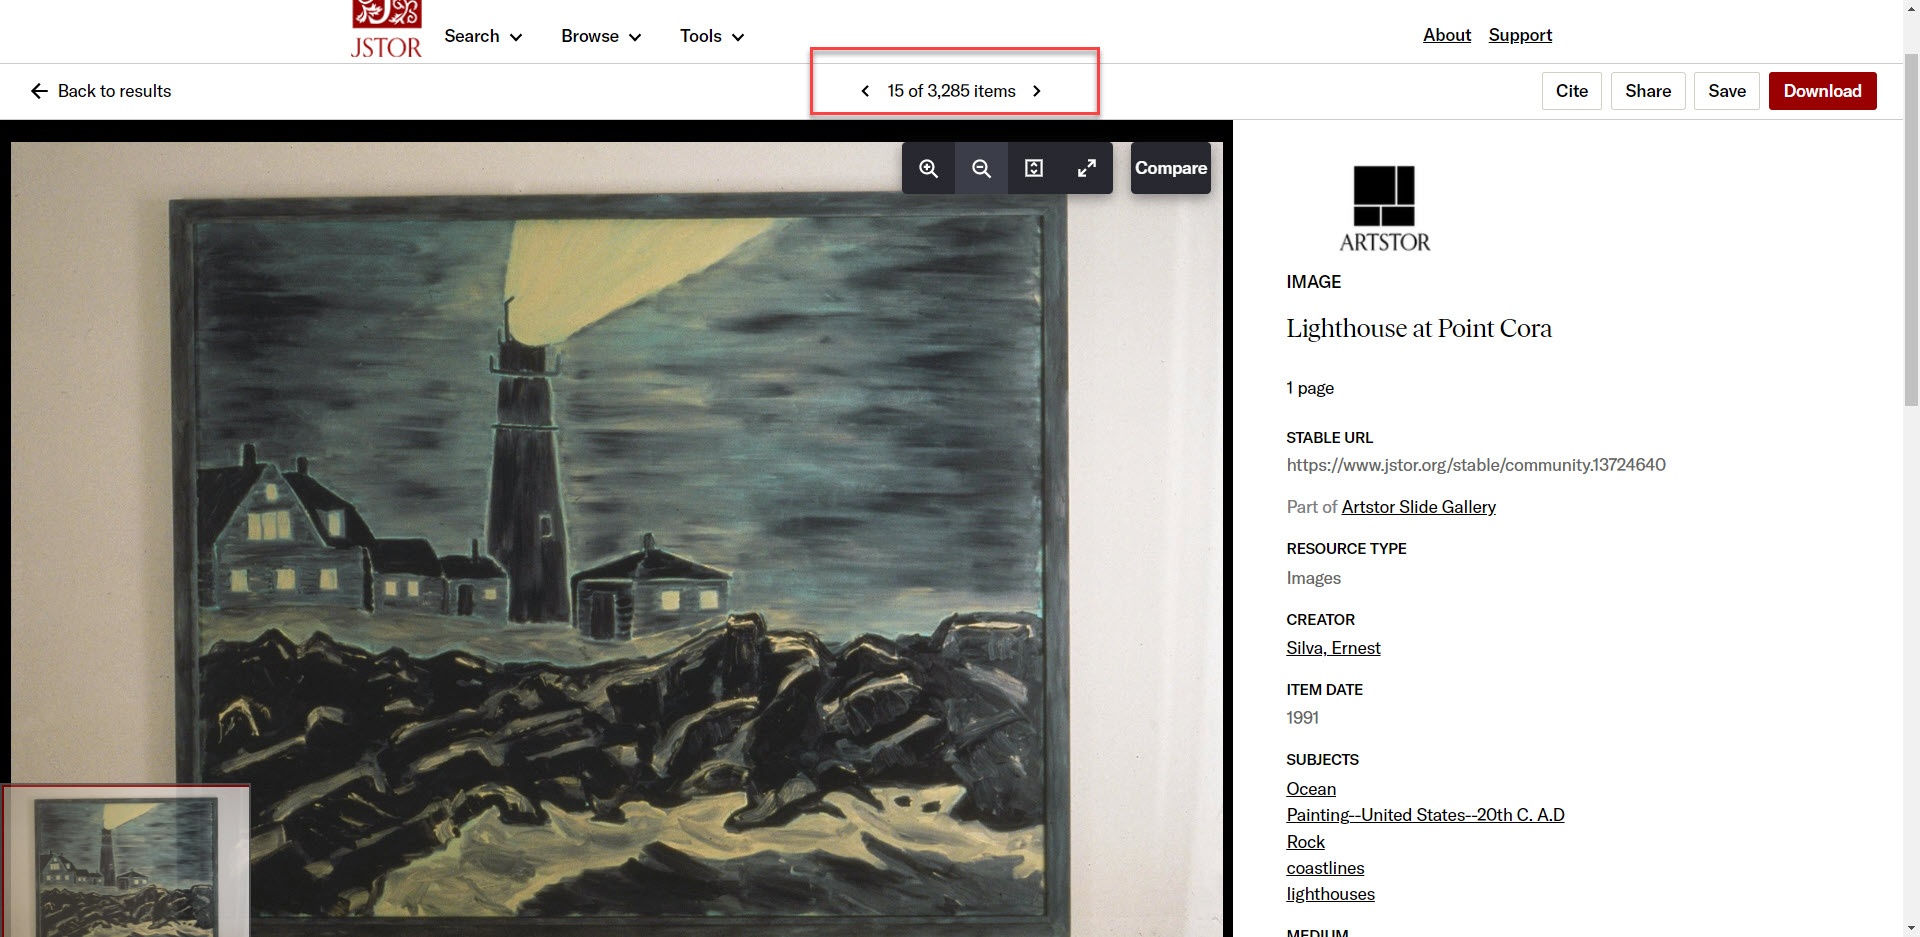 Example of navigation for using pagination to browse images